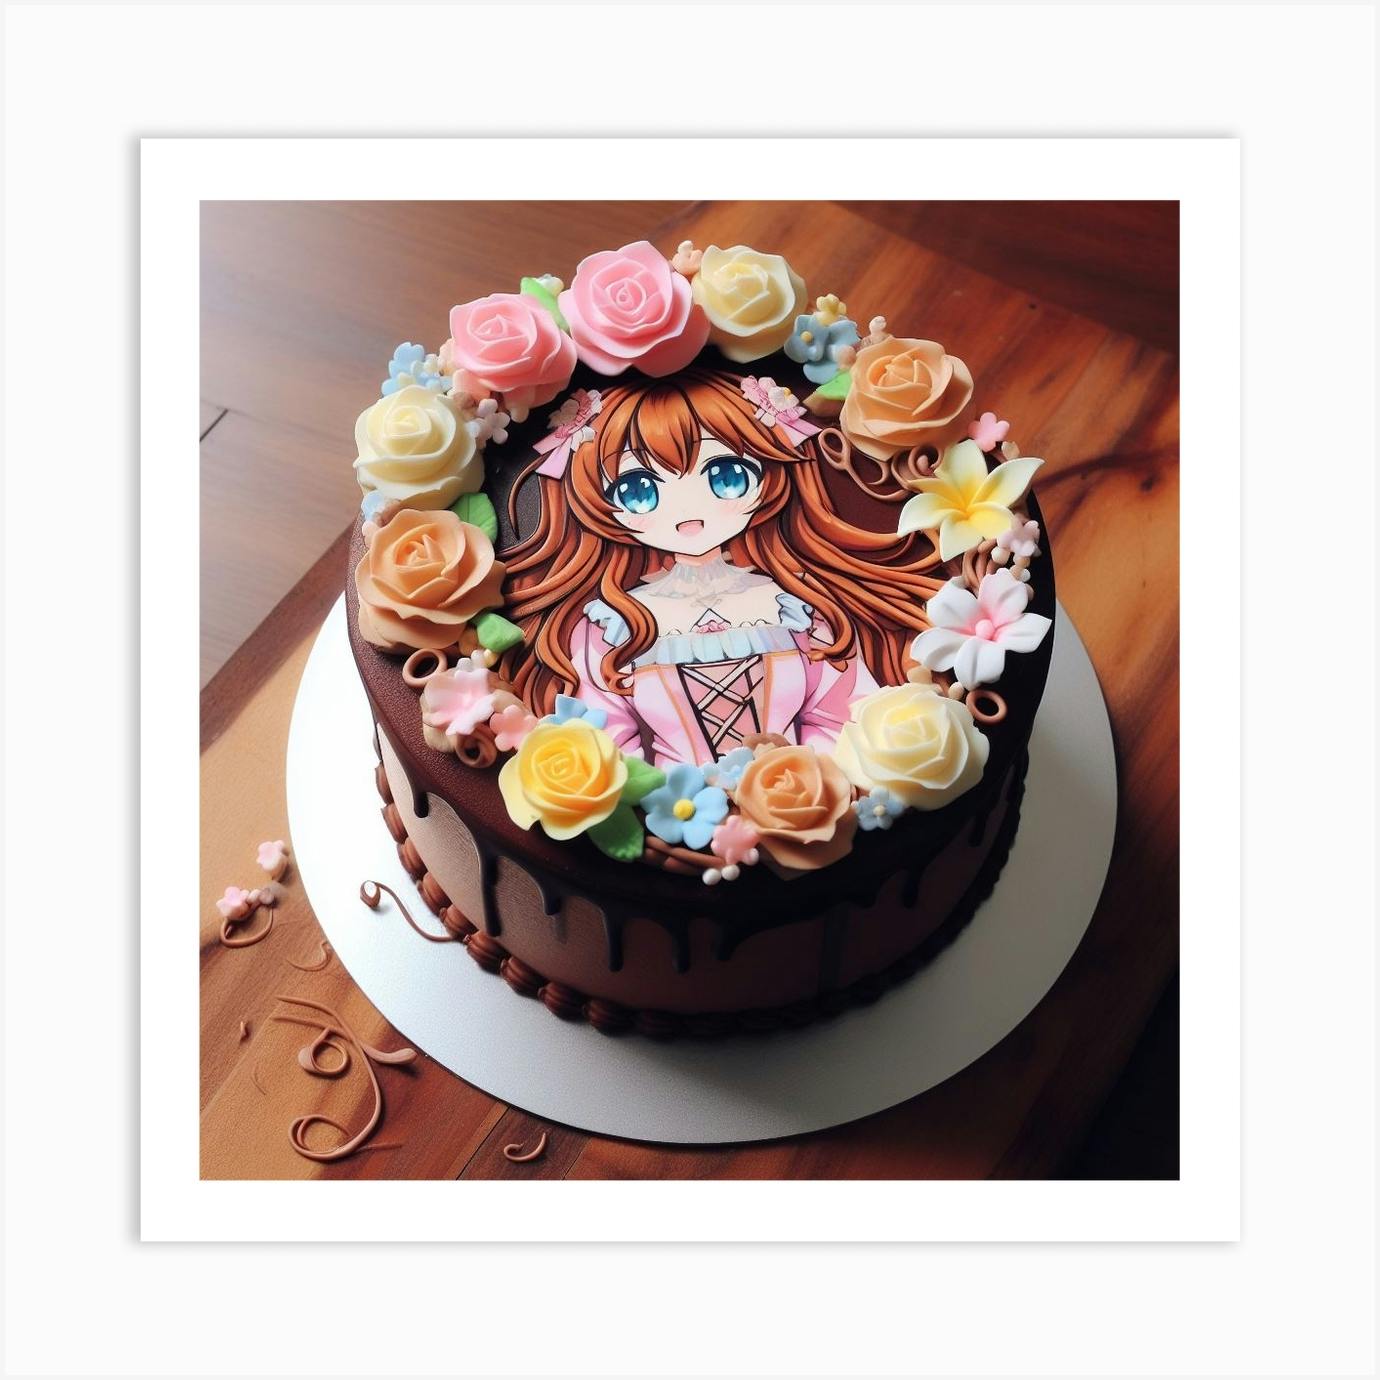 HOW TO MAKE ONE PIECE ANIME CAKE AT HOME - YouTube